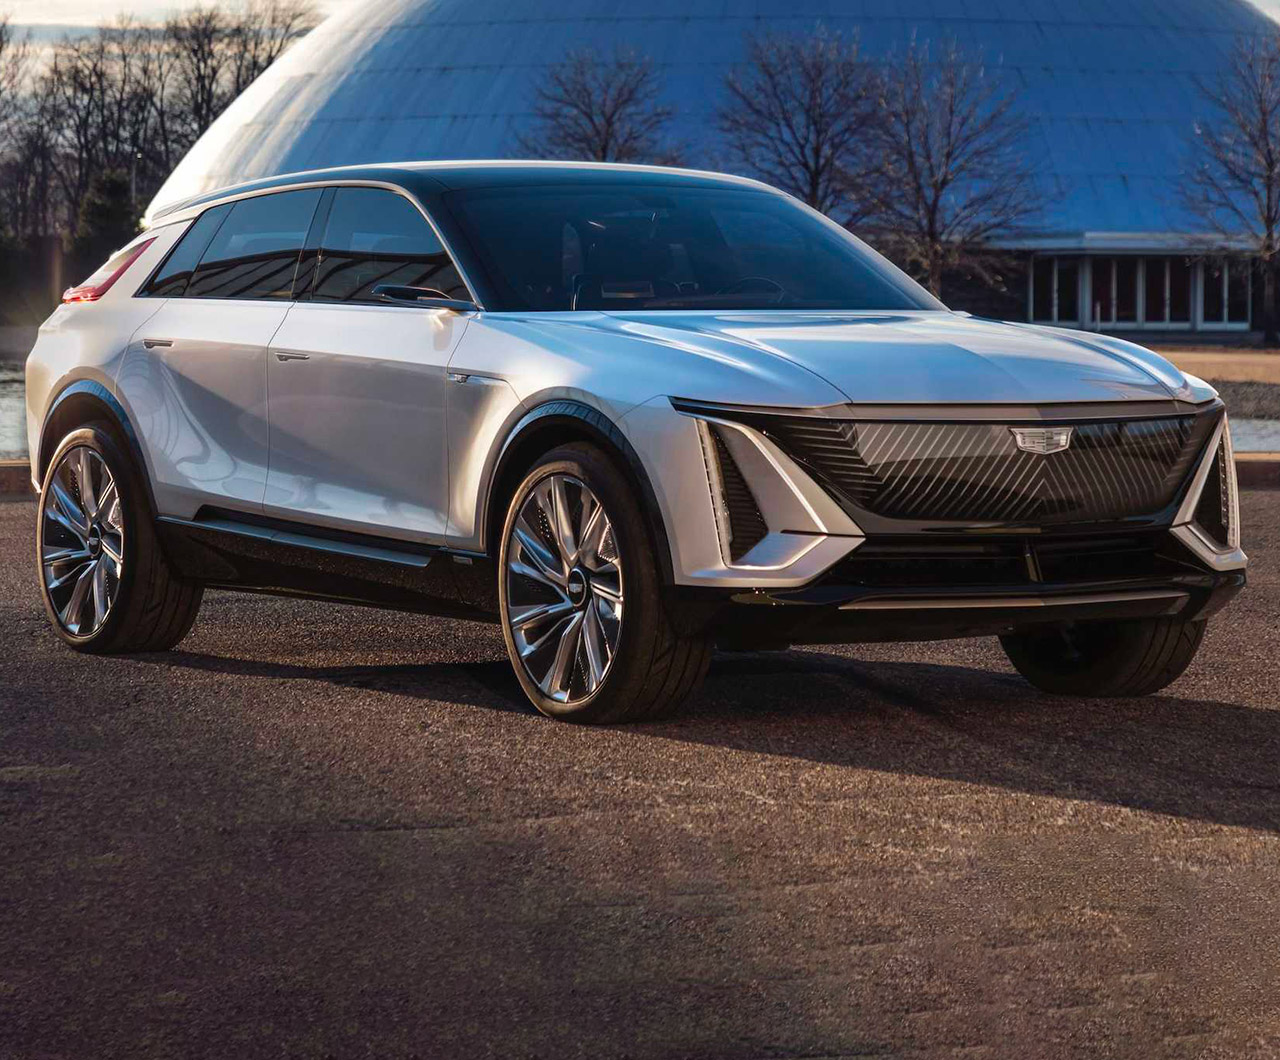 Cadillac LYRIQ AllElectric Crossover Unveiled, Has Massive 33inch LED